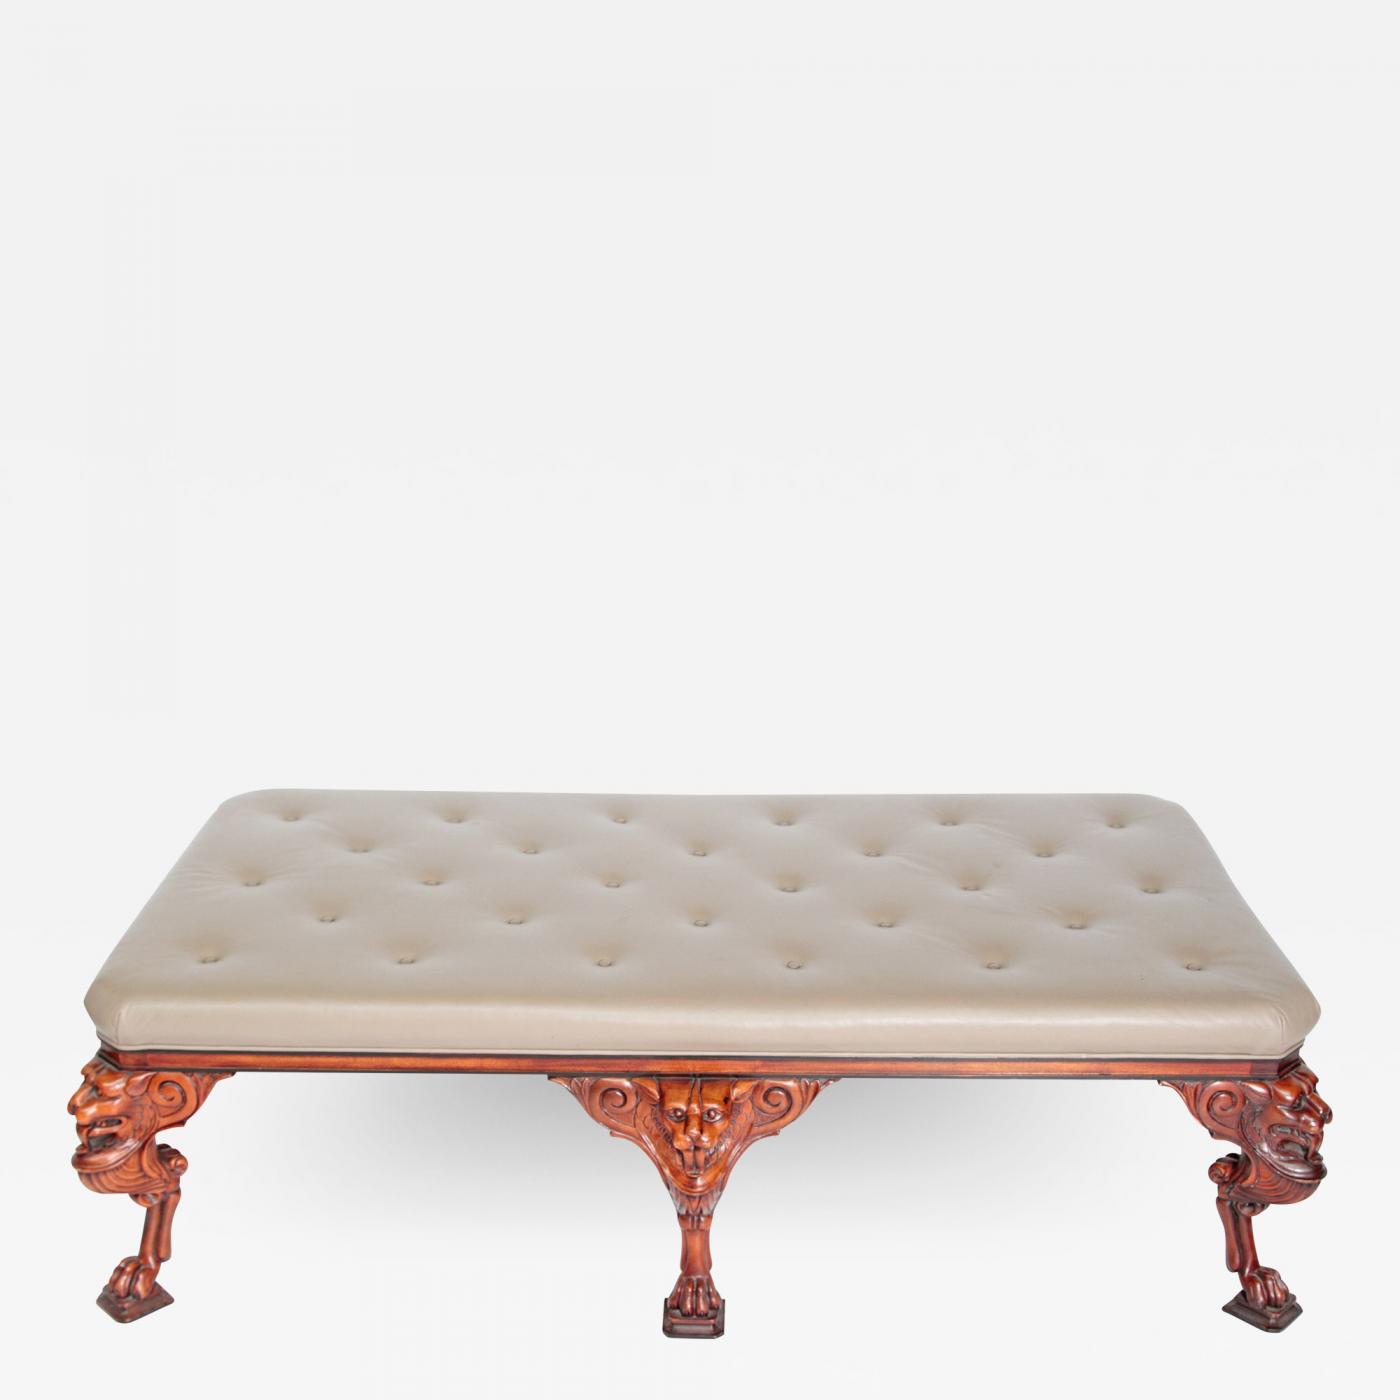 George II Style Large Upholstered Bench by Baker Furniture